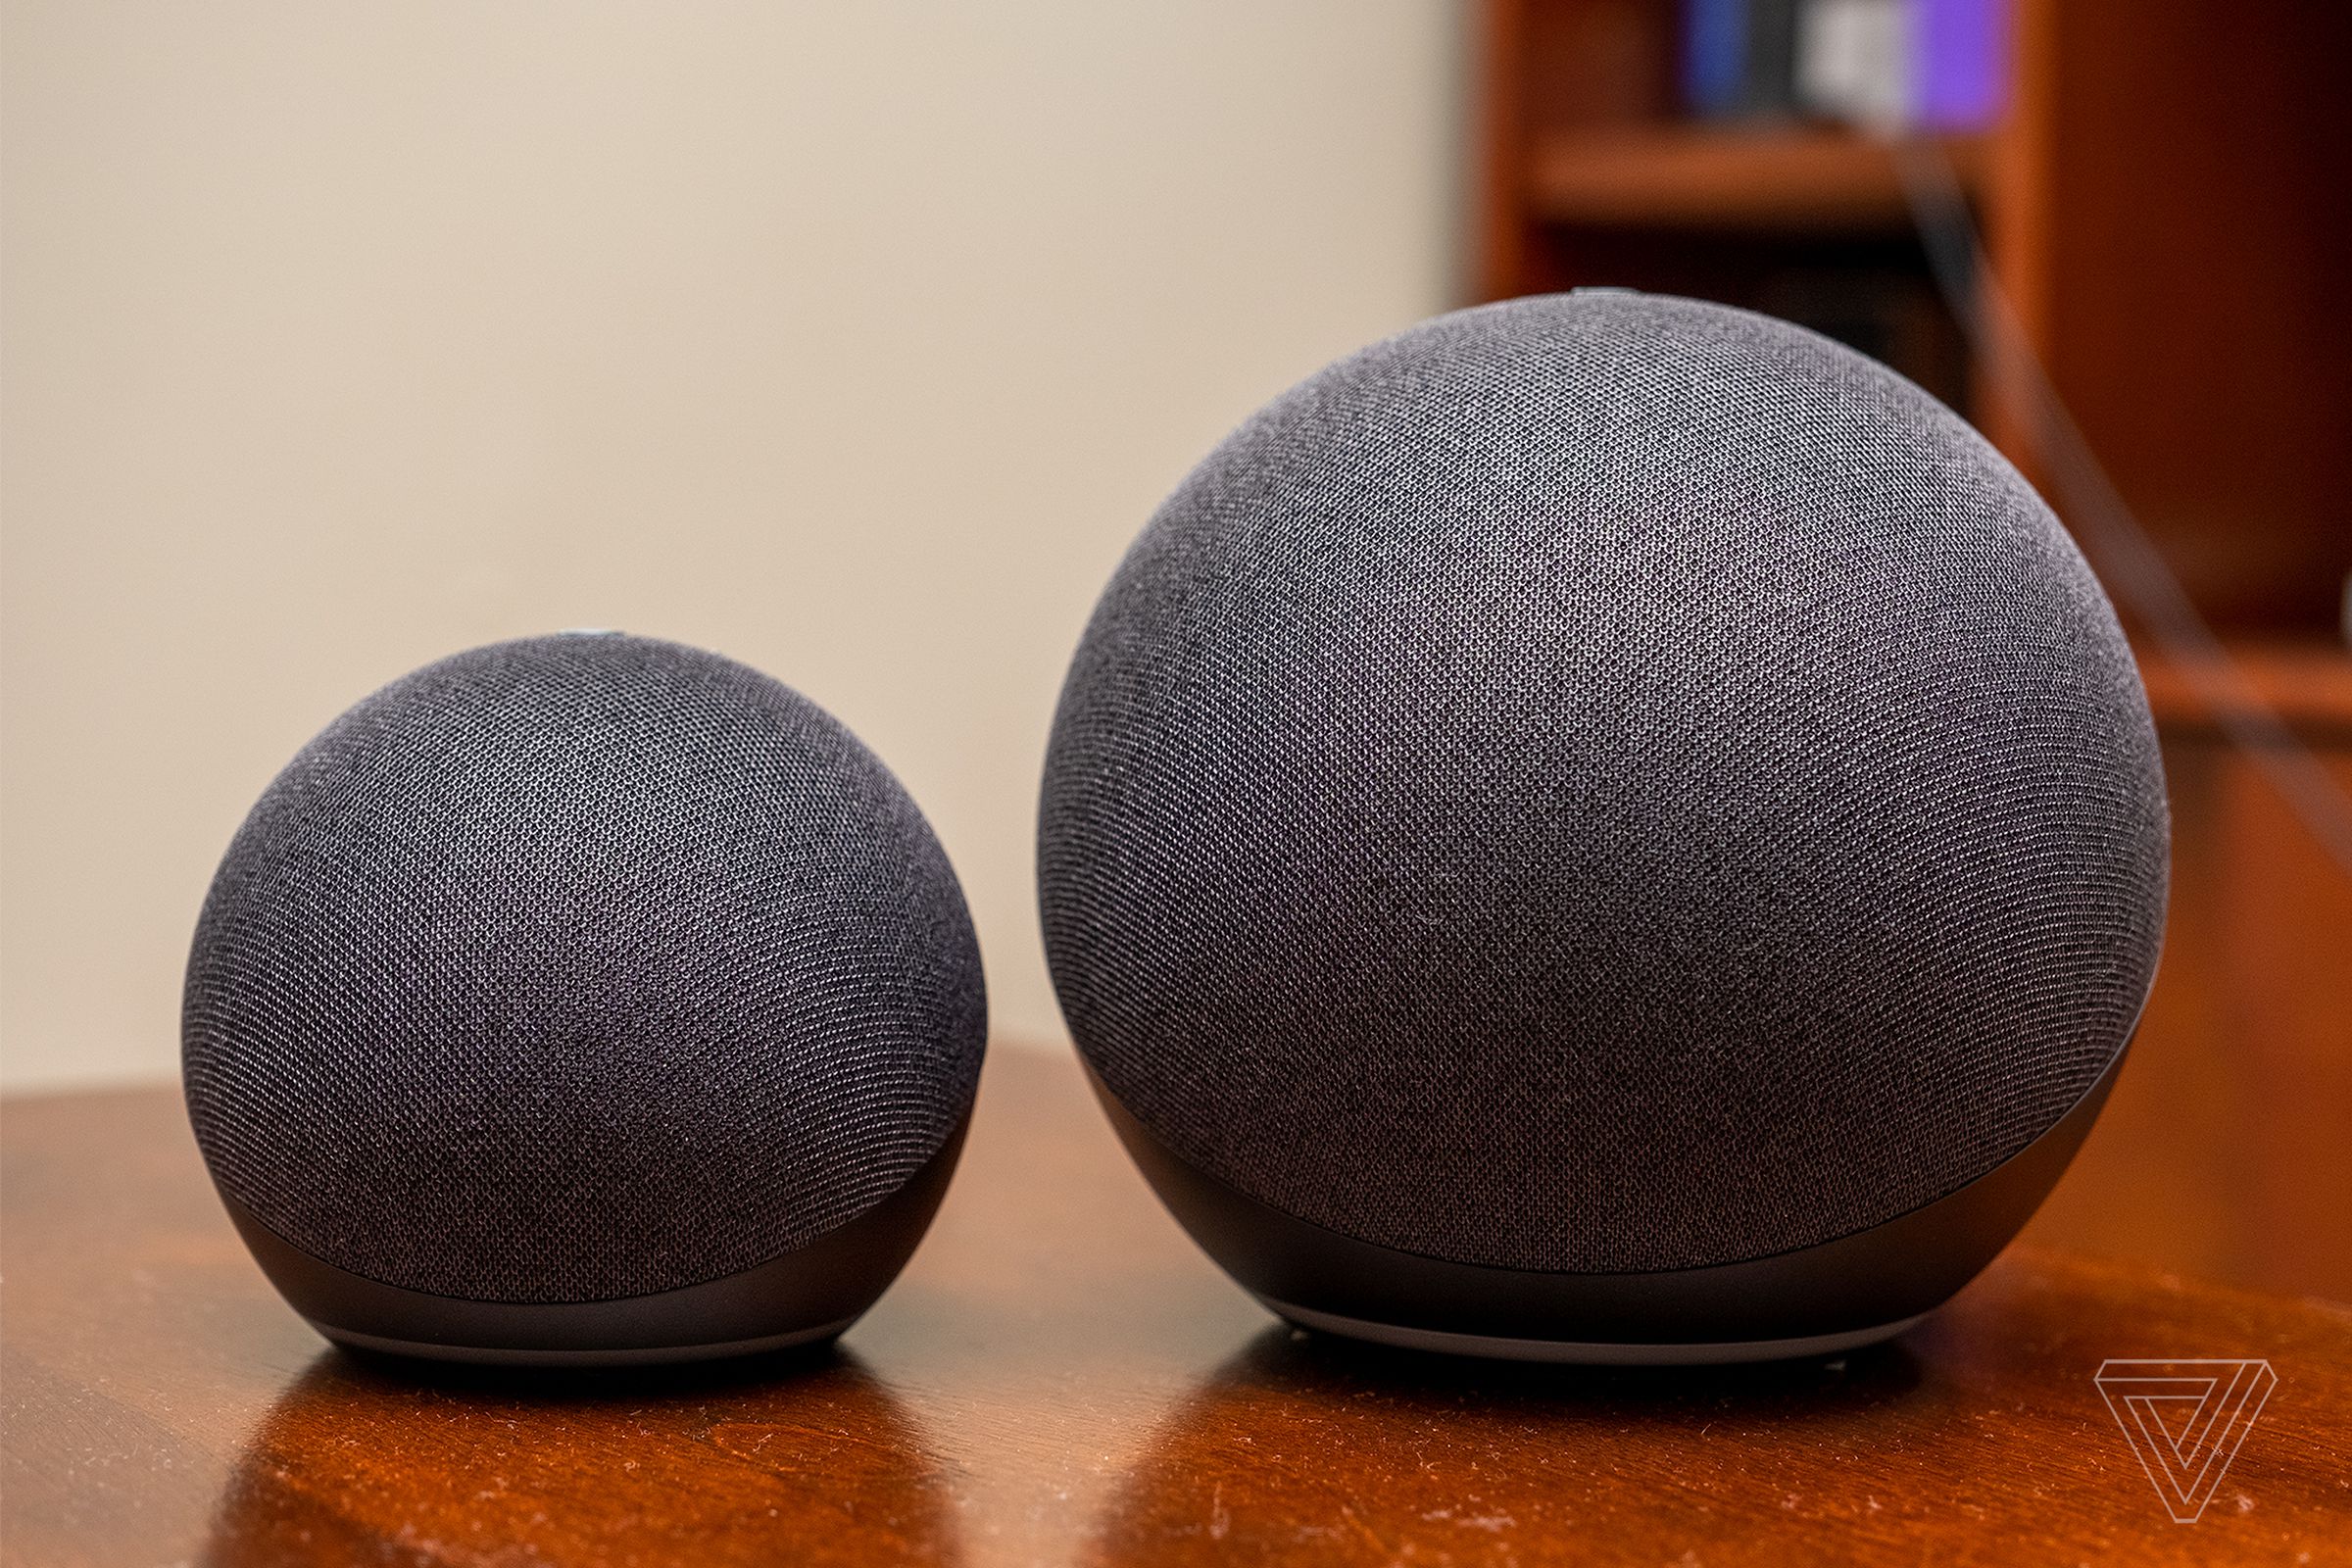 Amazon Echo smart speakers are Matter controllers, and this spring the 4th-gen Echo (right) will upgrade to become a Thread edge router.